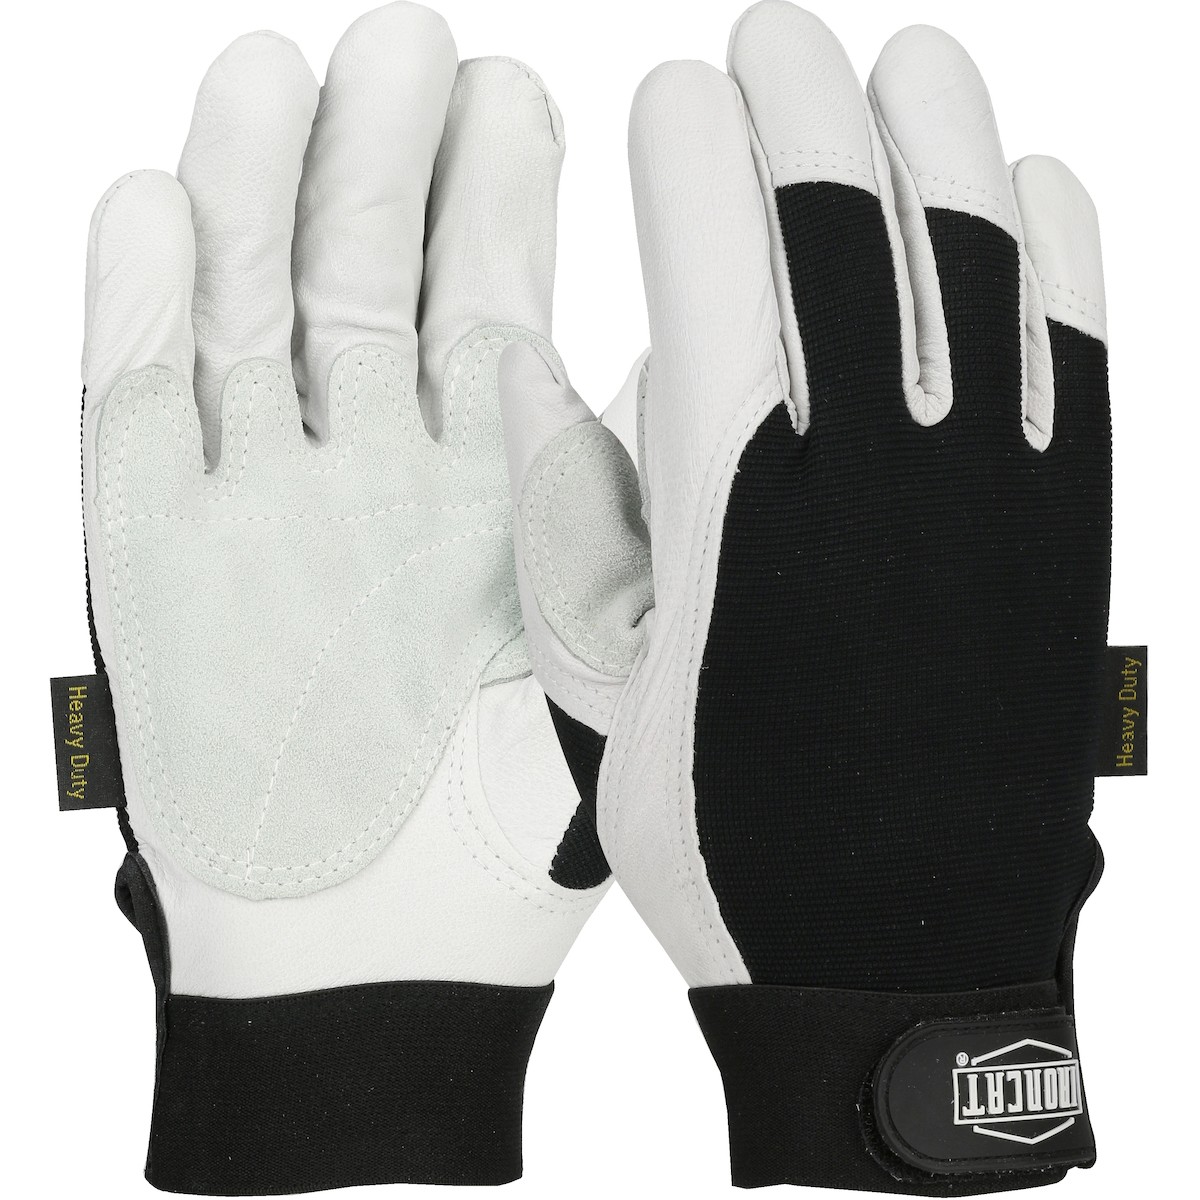 Ironcat® Reinforced Top Grain Goatskin Leather Palm Glove with Spandex Back  (#86550)